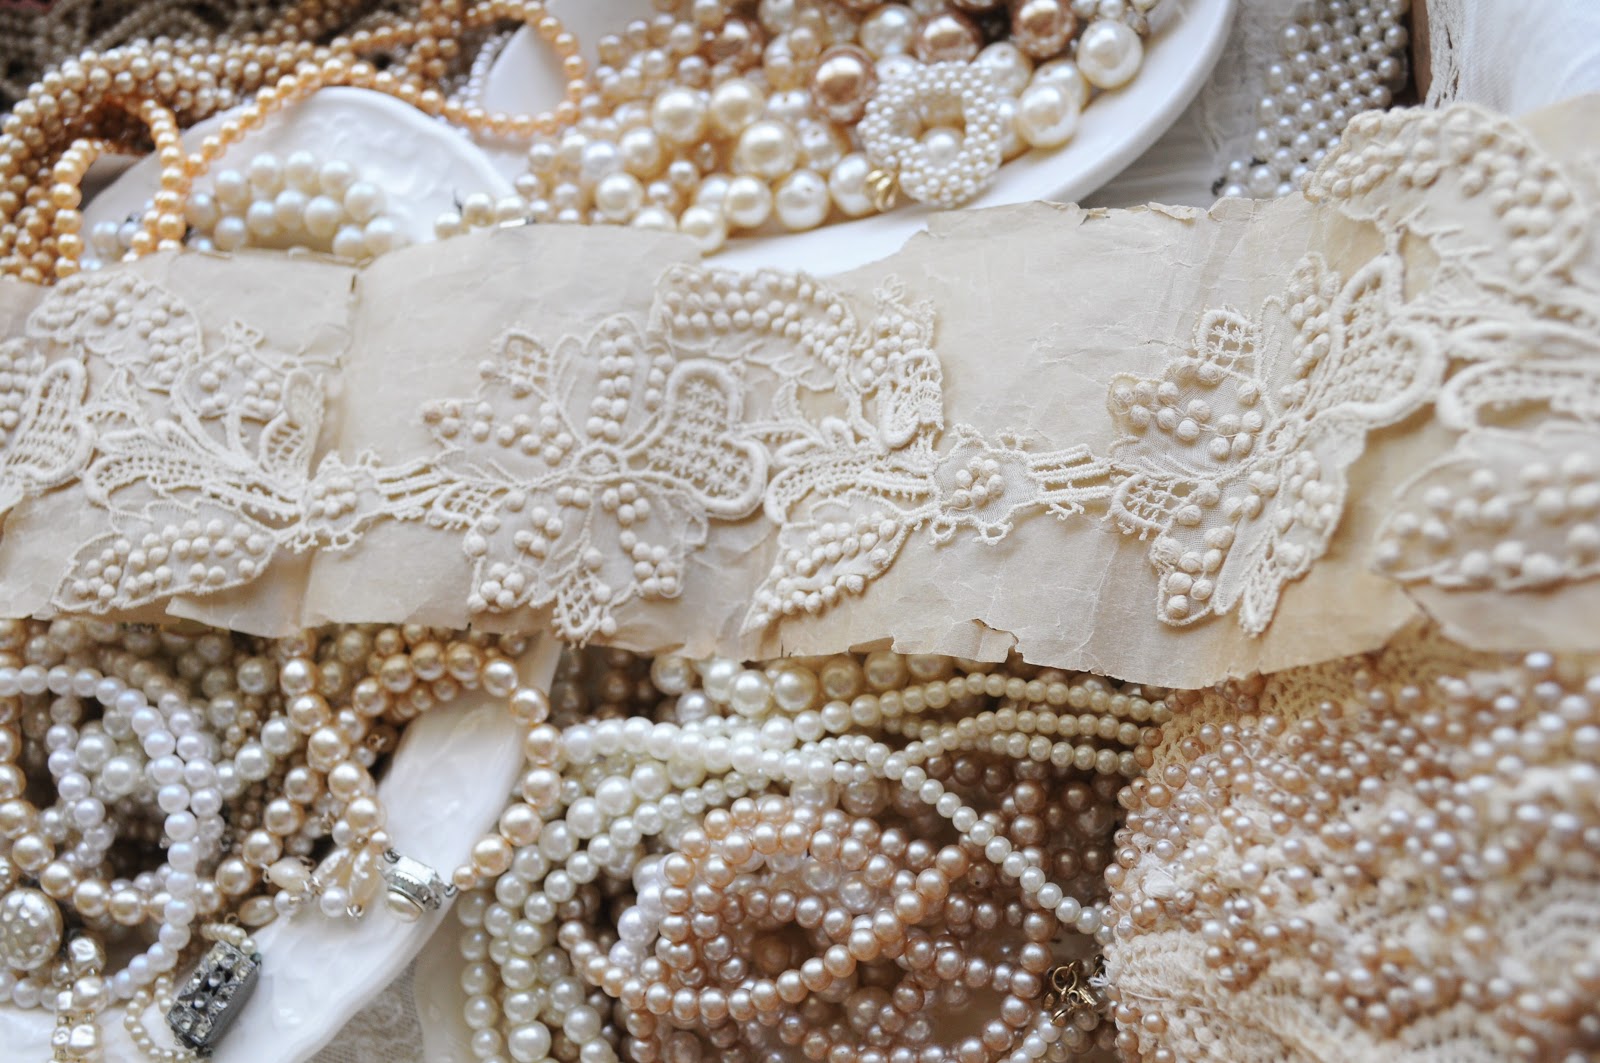 Pearls and Lace Thursday #136 "THAT KIND" of Lace with Pearls.